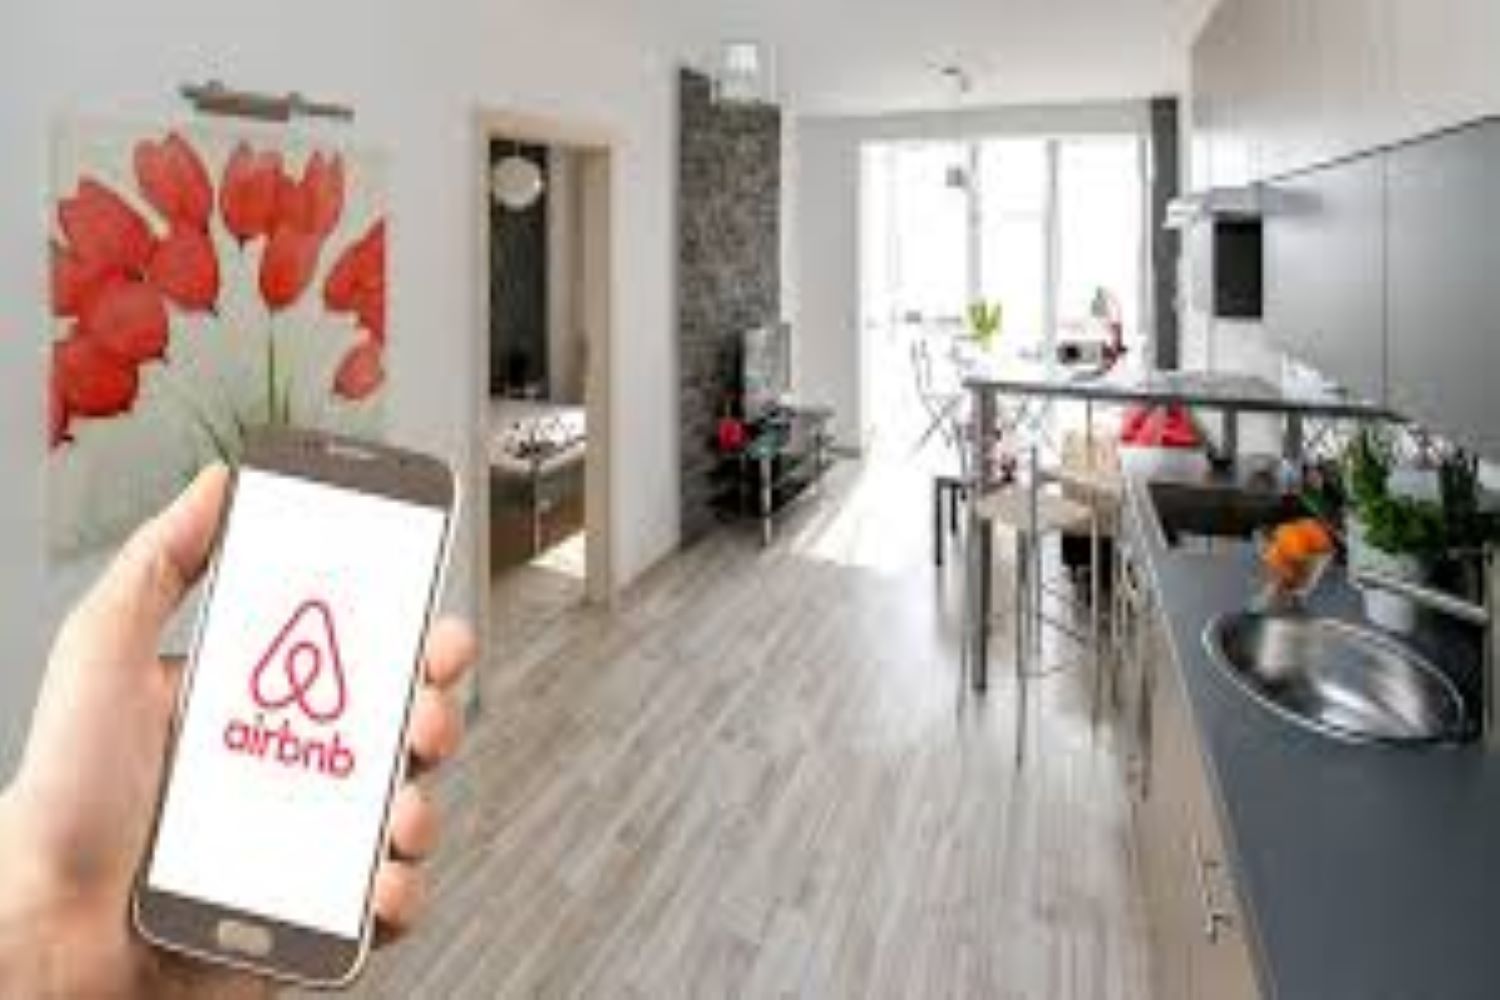 passives airbnb 337a853f